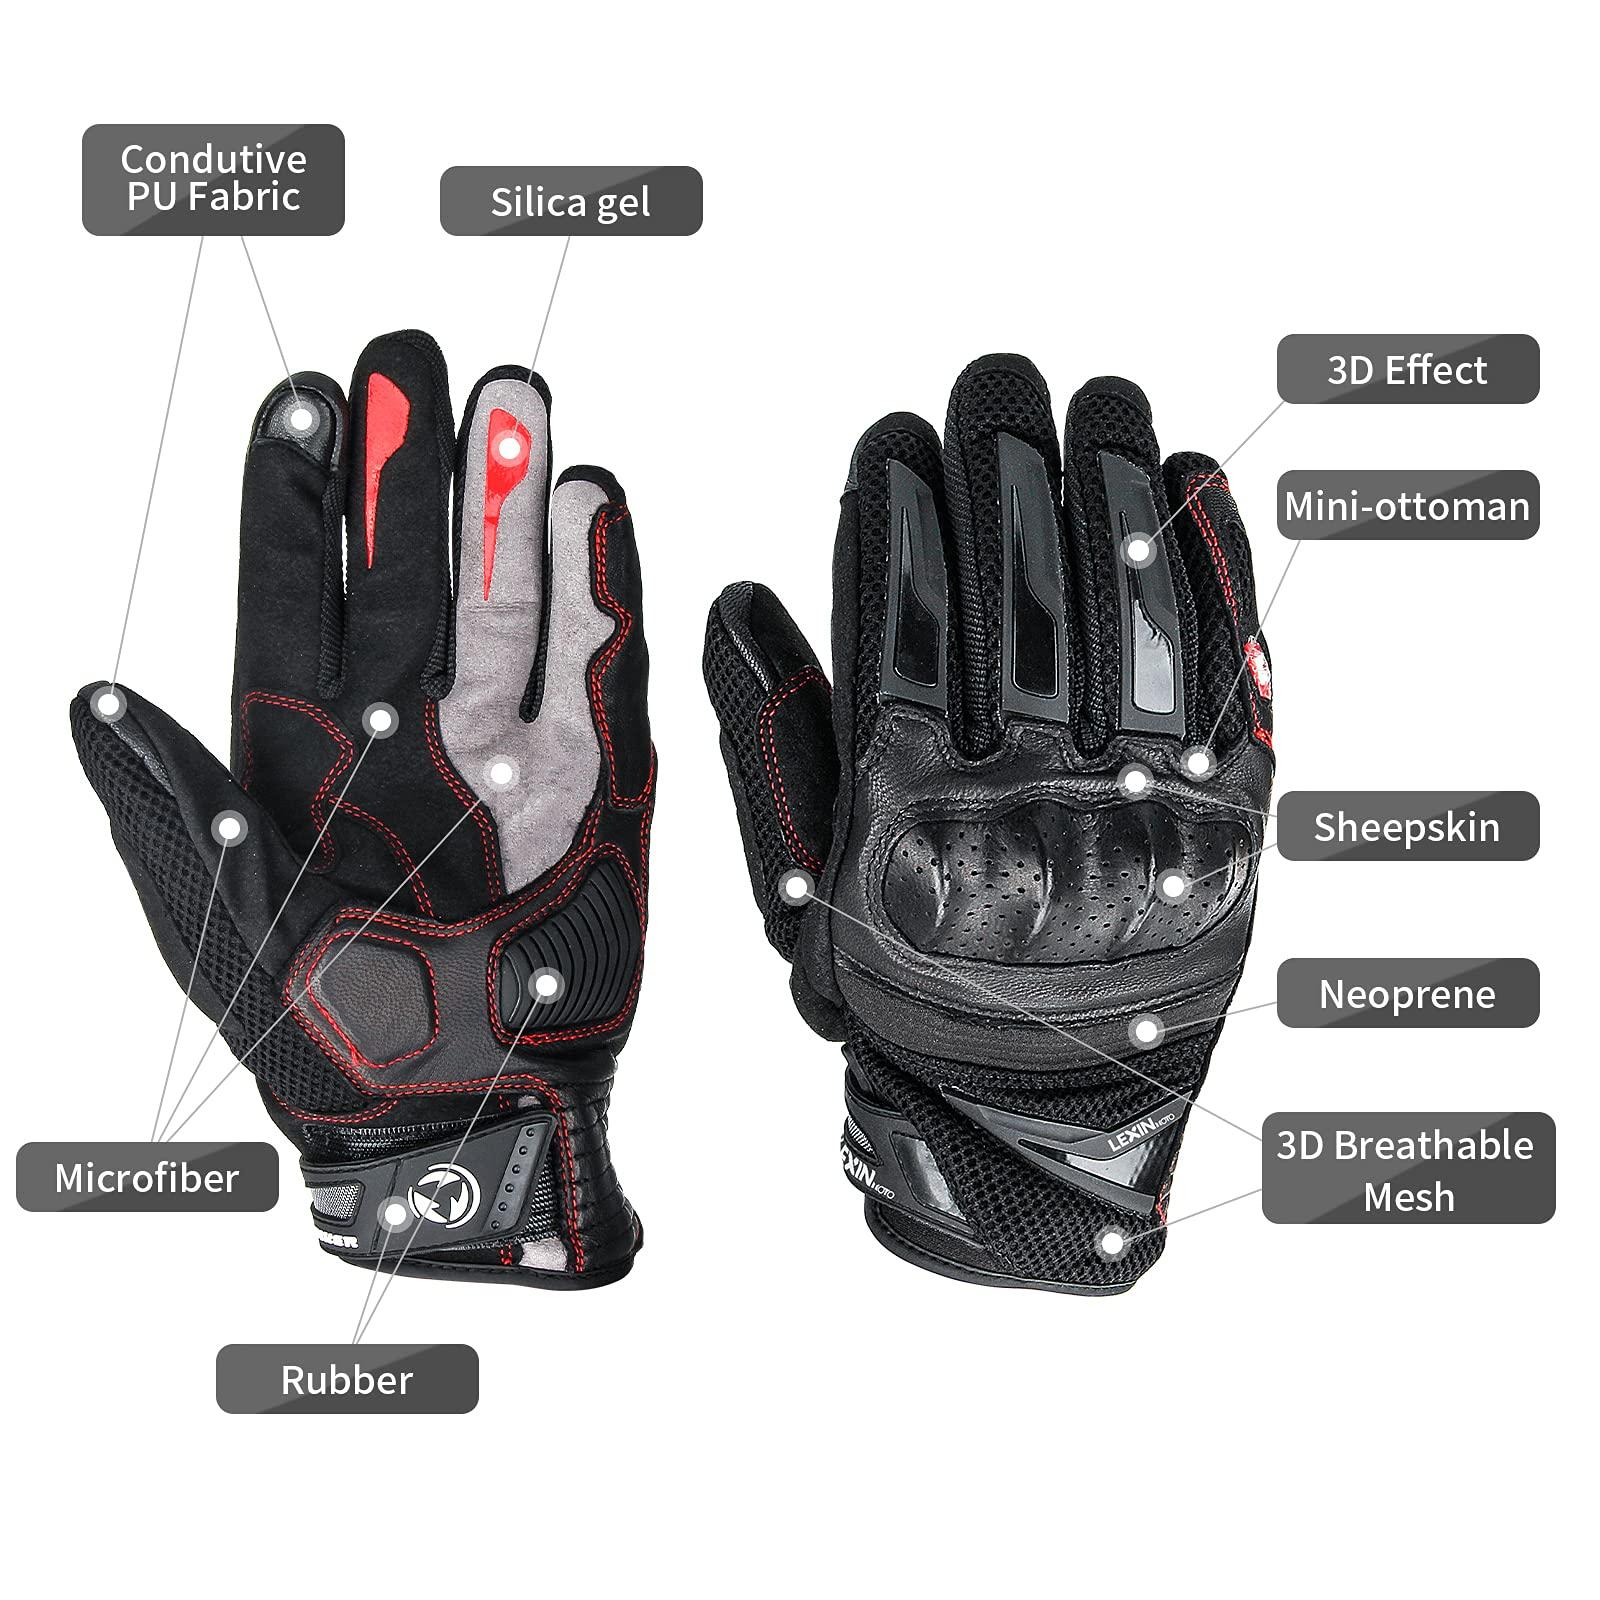 LEXIN Motorcycle Riding Gloves, Motorcycle Gloves for Men, Hard Knuckle Touch Screen Motorbike Glove for Cycling, ATV, Driving M/L/XL (045Black, L) 1